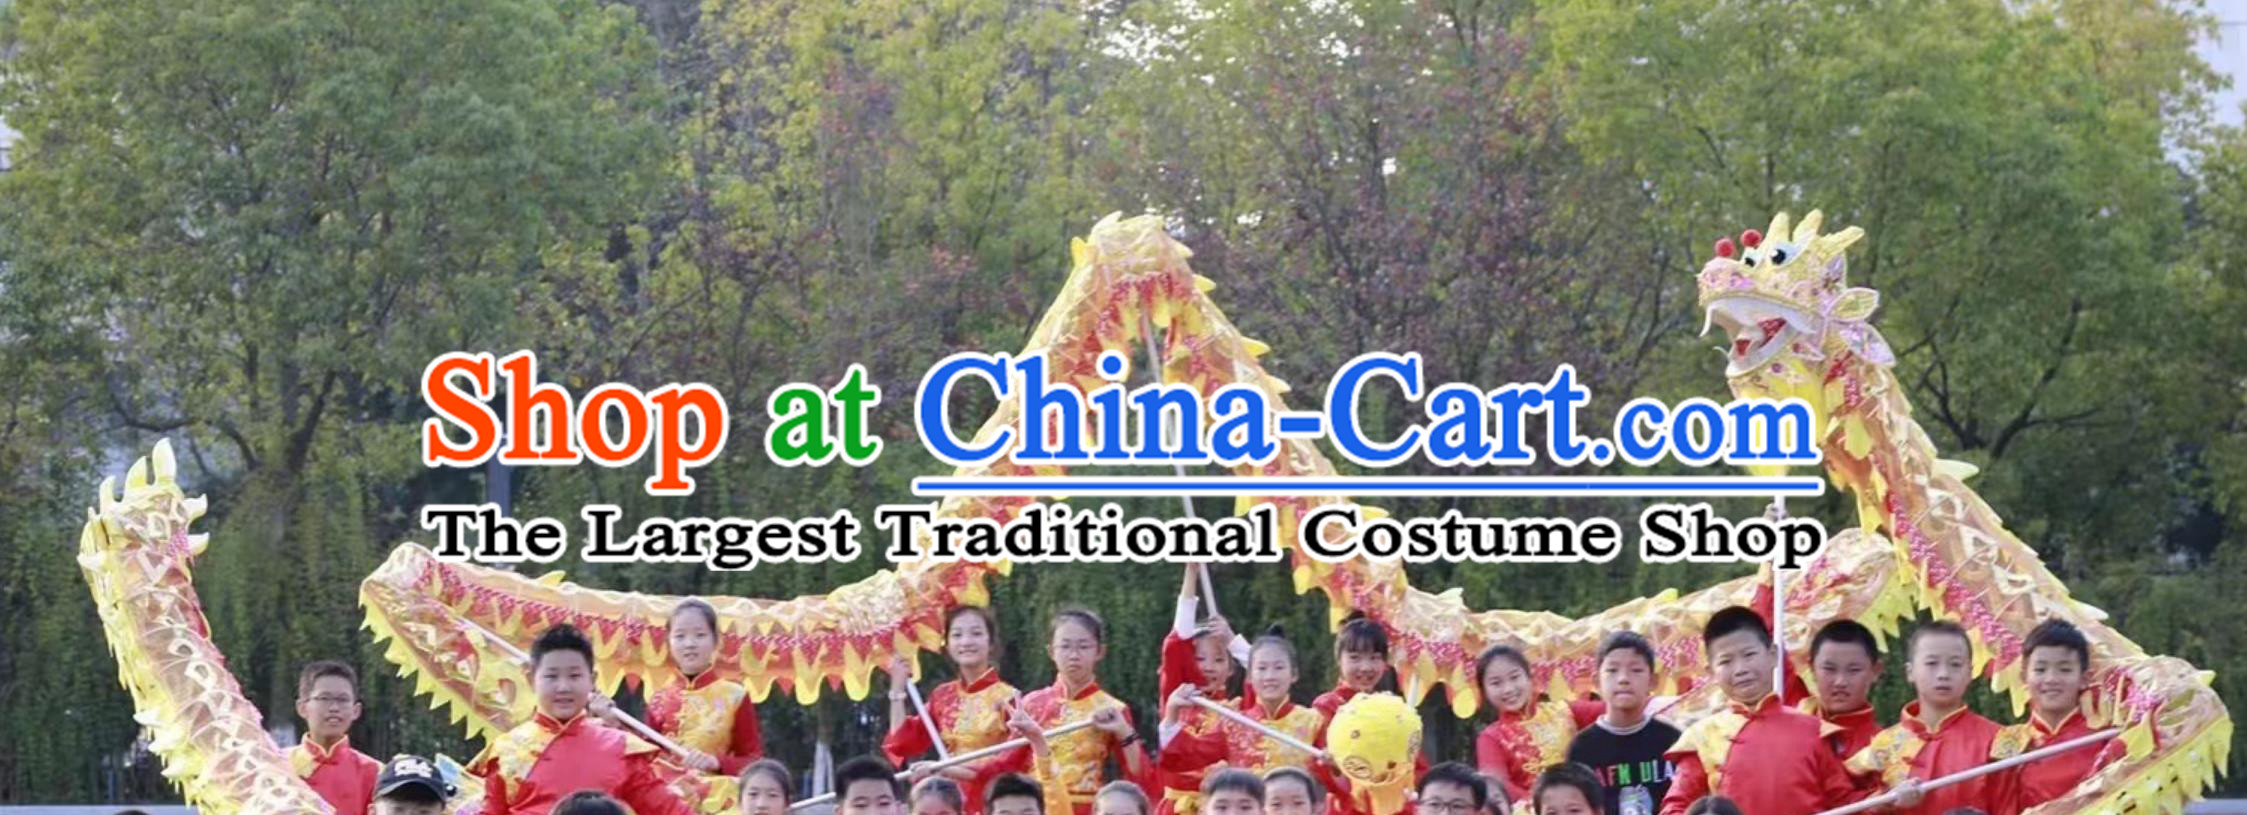 Professional Competition Dragon Dancing Prop Chinese Dragon Dance Fluorescent Costume Celebration Parade Golden Dragon Costume